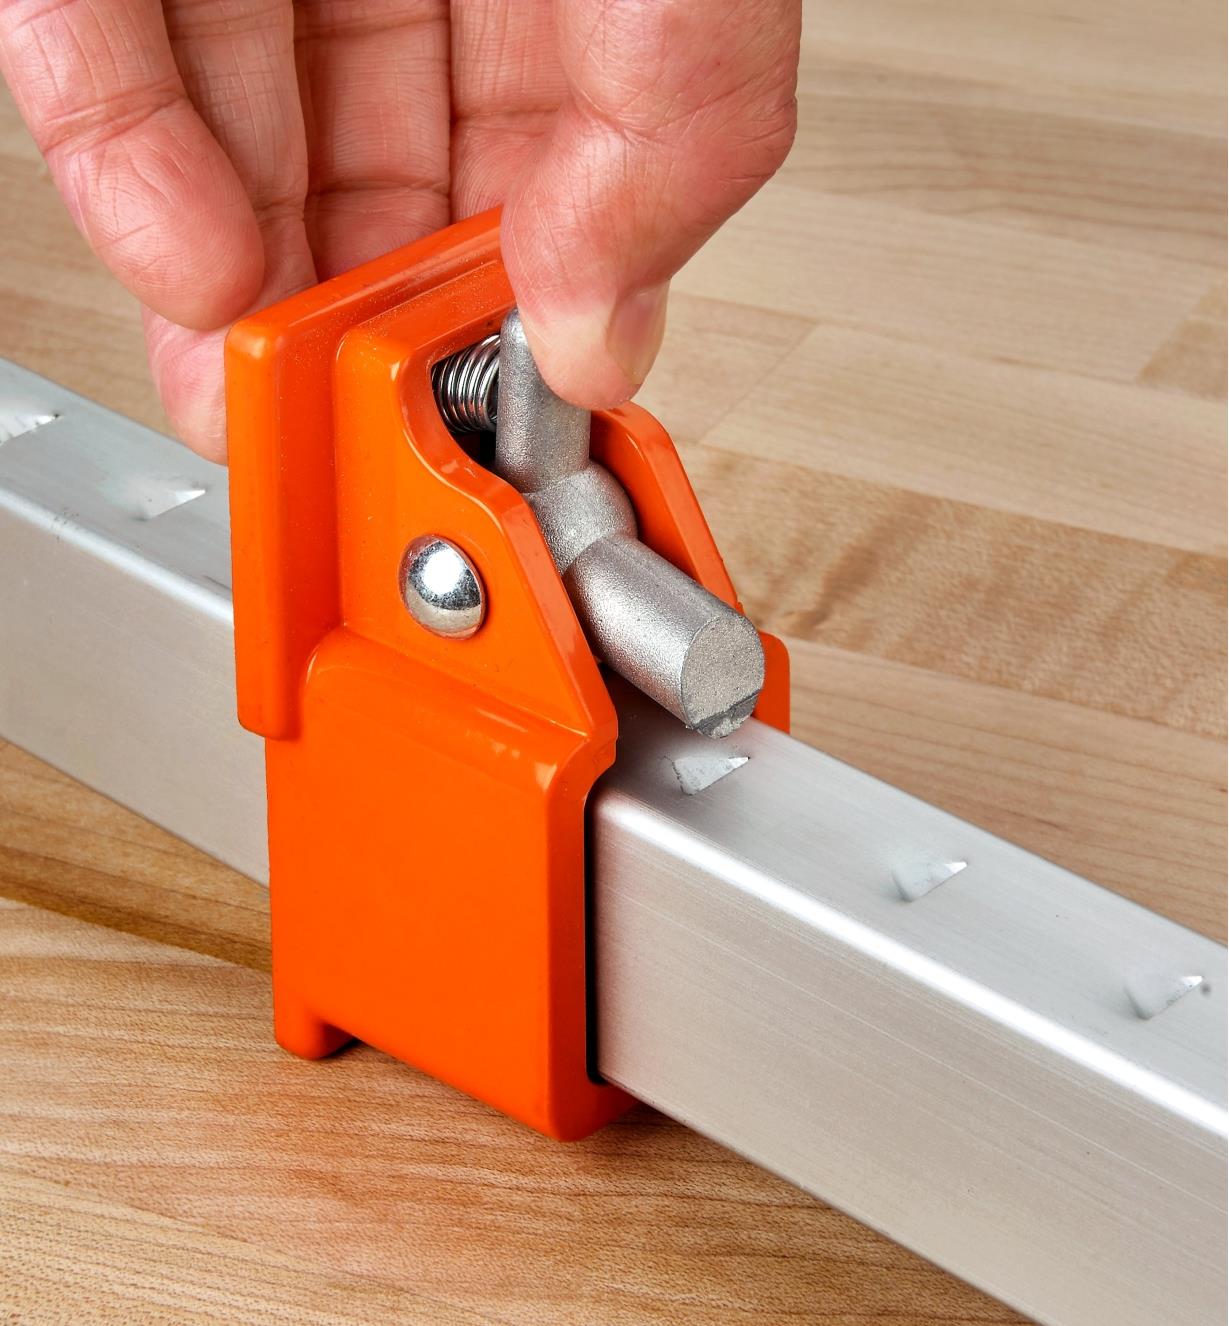 Squeezing the release trigger on the movable head of a Jorgensen aluminum bar clamp